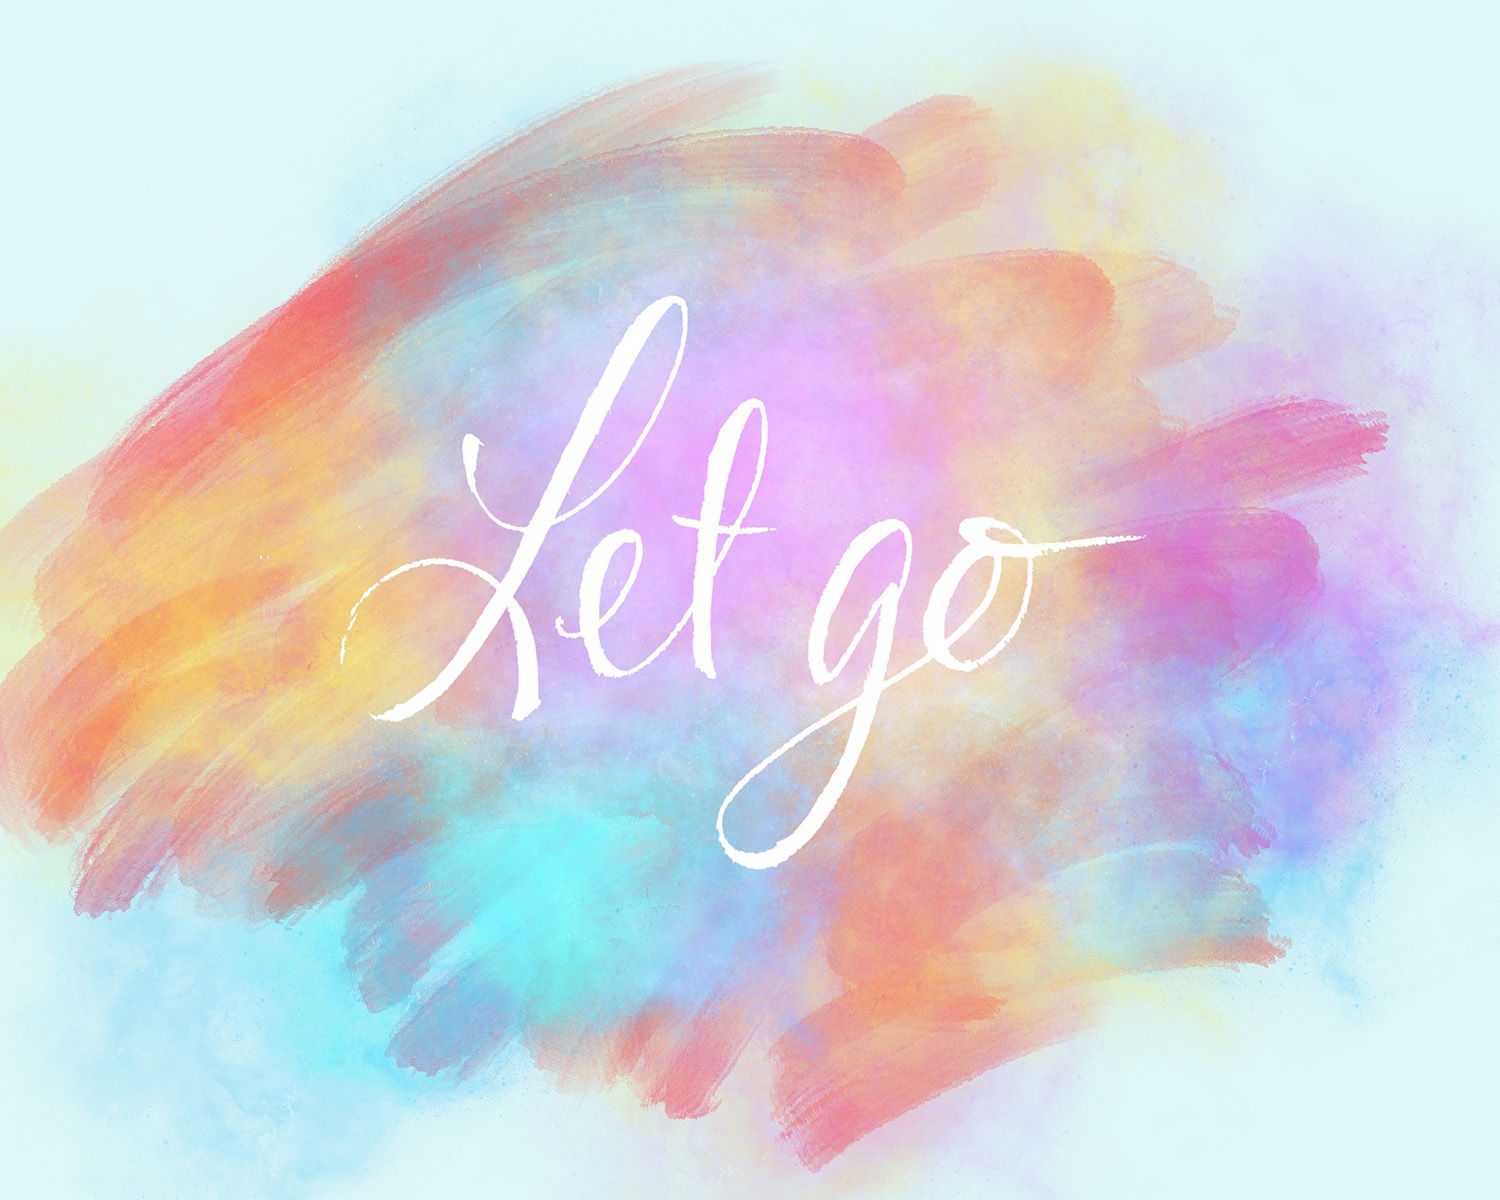 The words Let Go in script lettering on a colorful, watercolor background